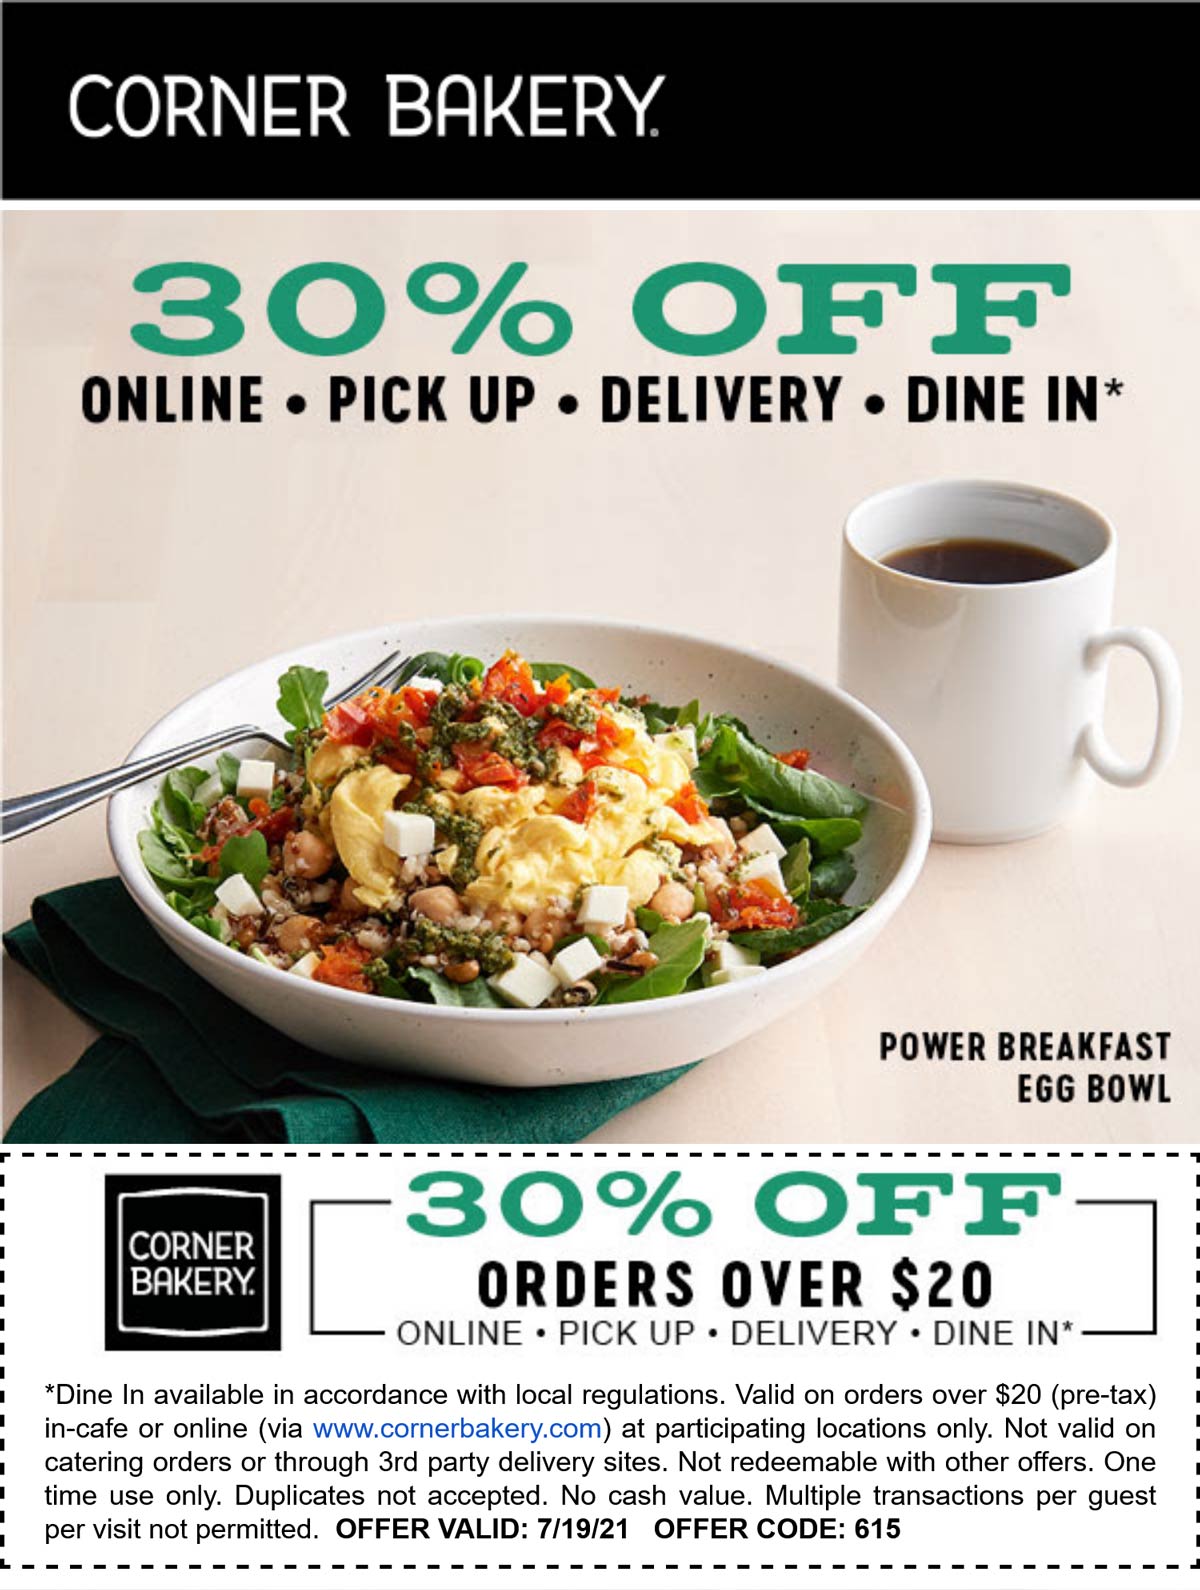 Corner Bakery restaurants Coupon  30% off today at Corner Bakery Cafe restaurants #cornerbakery 